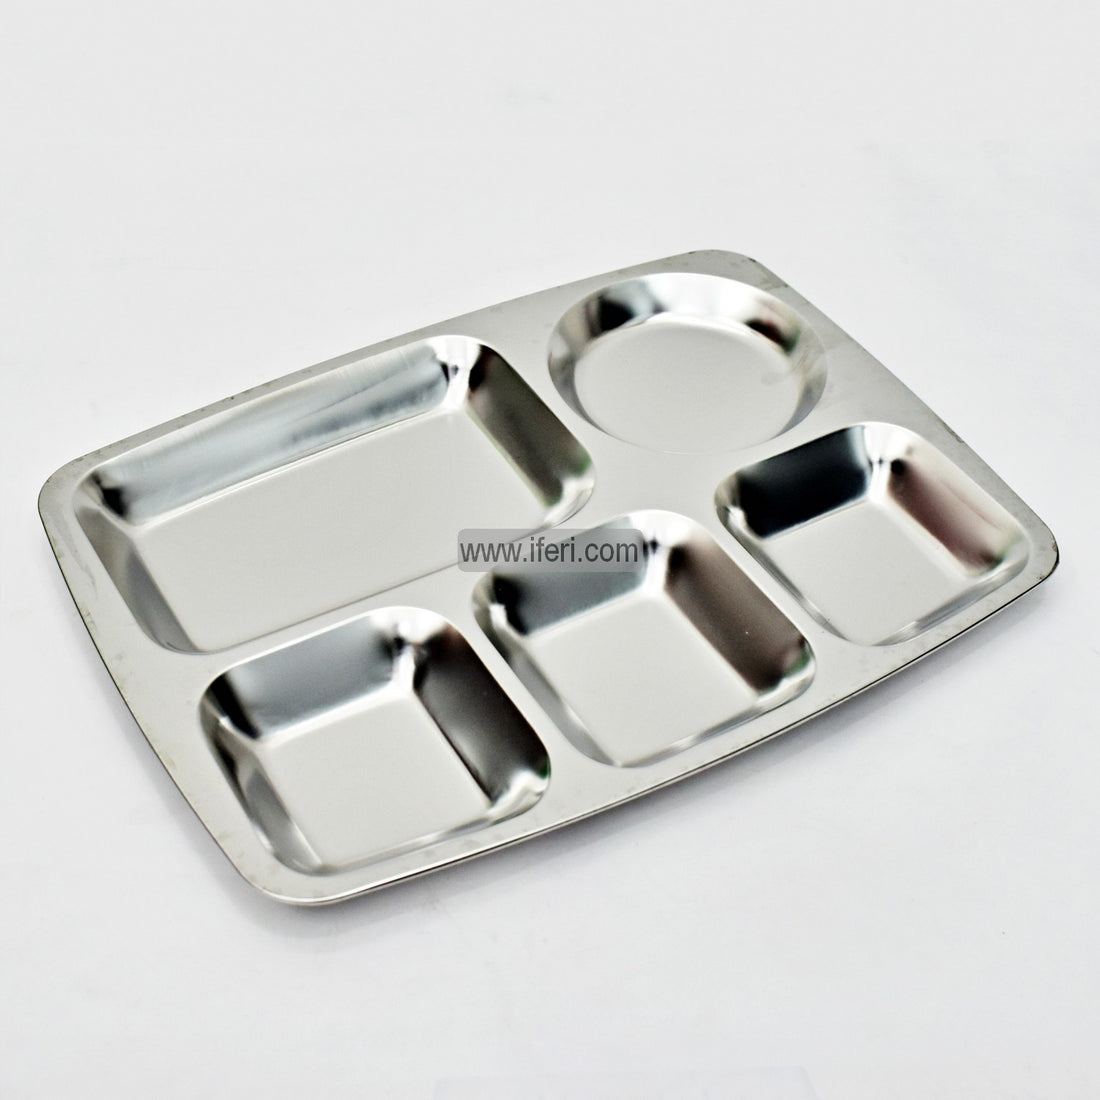 5 Compartment Stainless Steel Divided Thali / Food Plate TG10537